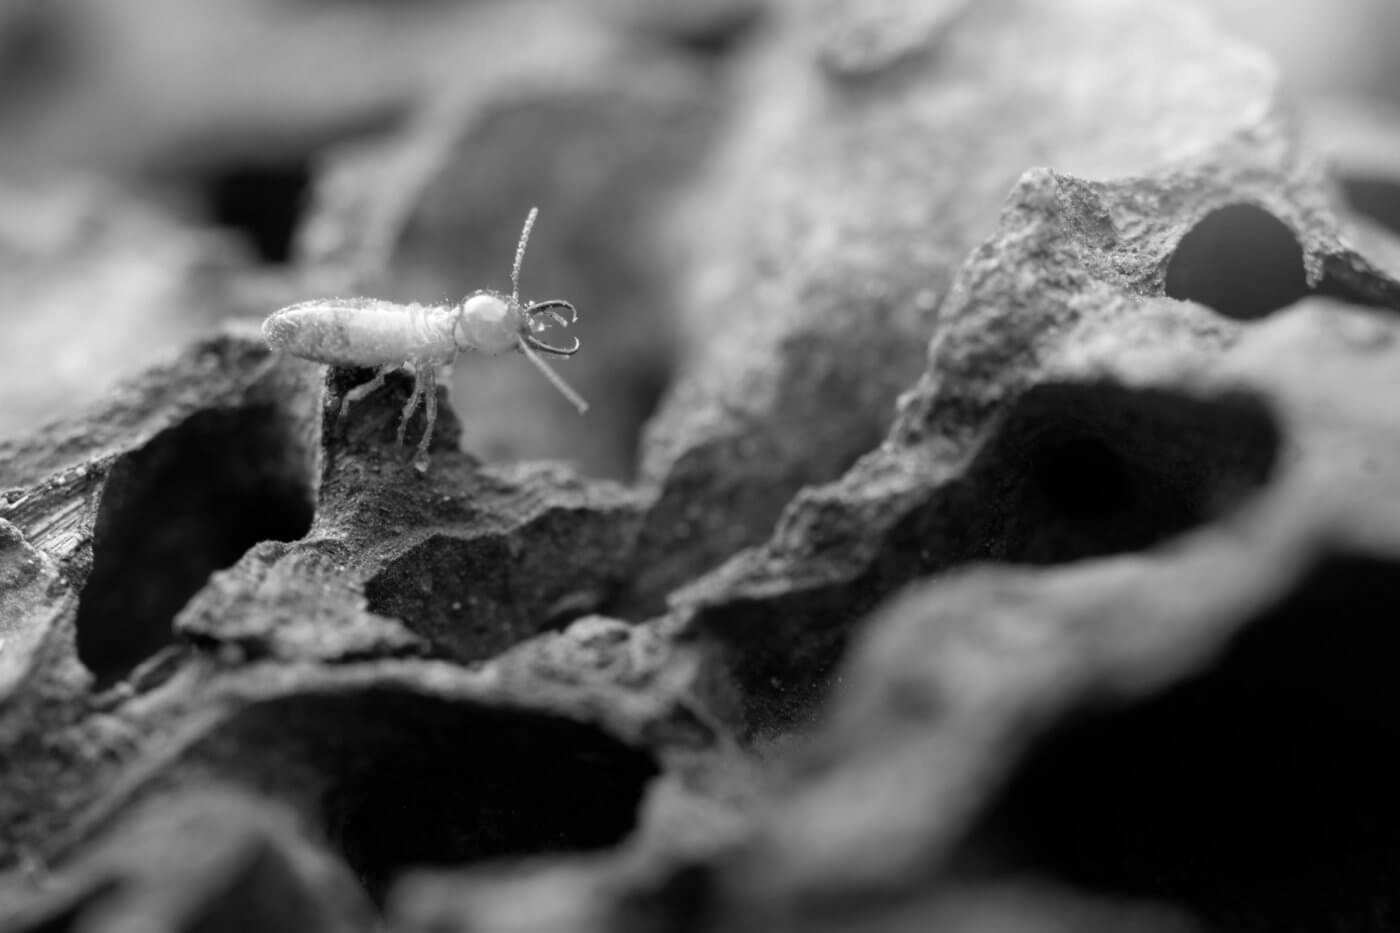 How to Get Rid of Termites: Identification, Treatment, and Prevention